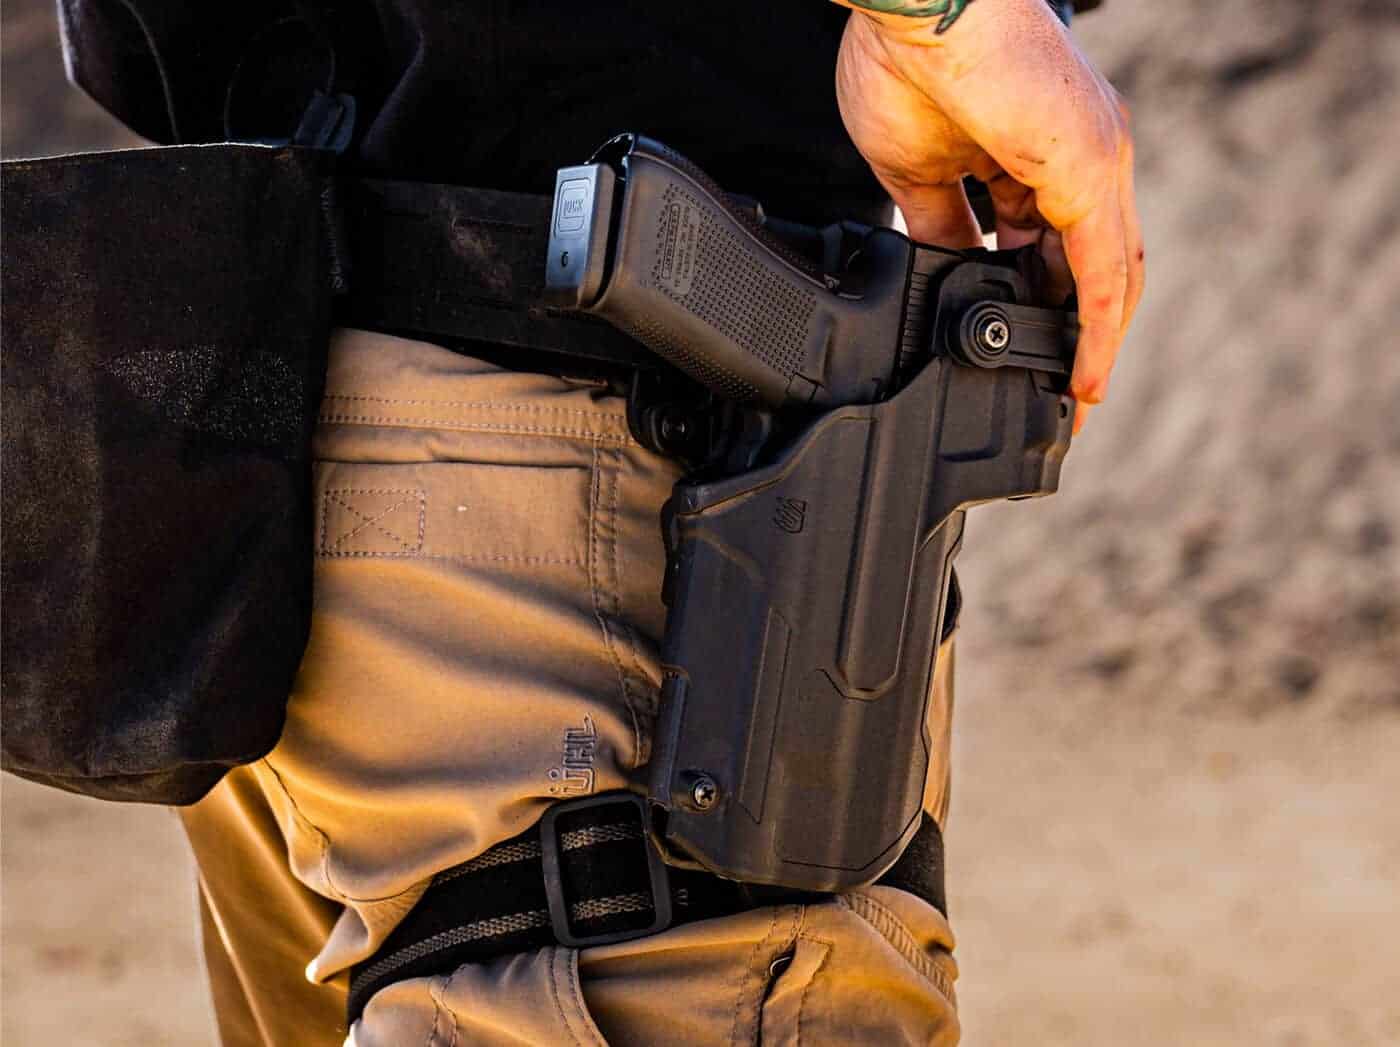 4. The Top Holster Accessories for Enhanced Concealed Carry